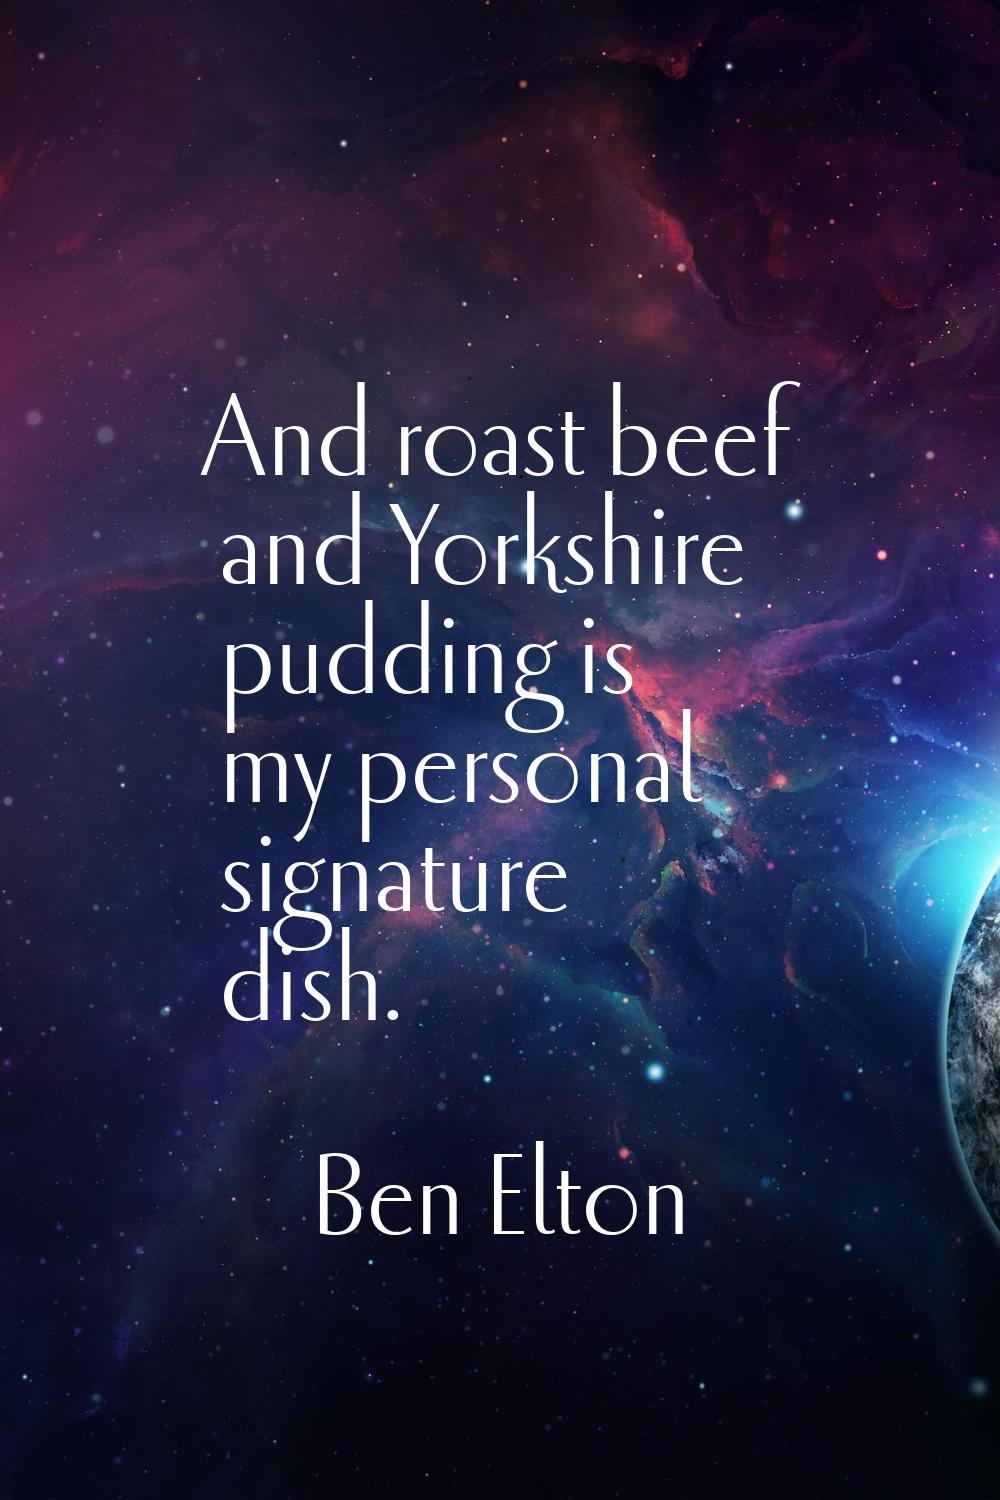 And roast beef and Yorkshire pudding is my personal signature dish.